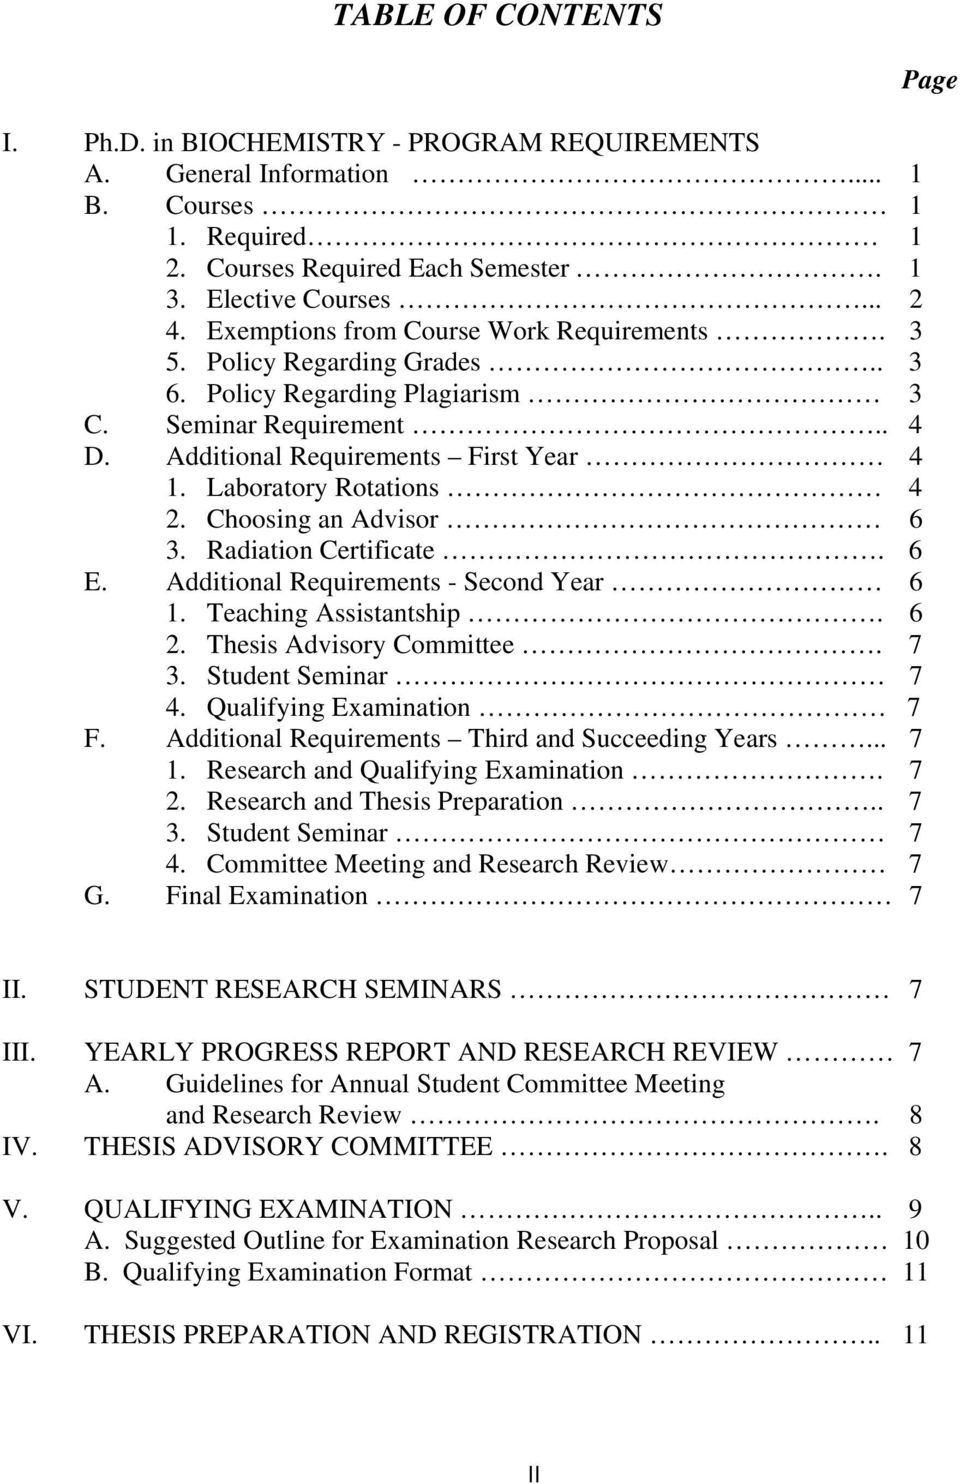 Laboratory Rotations 4 2. Choosing an Advisor 6 3. Radiation Certificate. 6 E. Additional Requirements - Second Year 6 1. Teaching Assistantship. 6 2. Thesis Advisory Committee. 7 3.